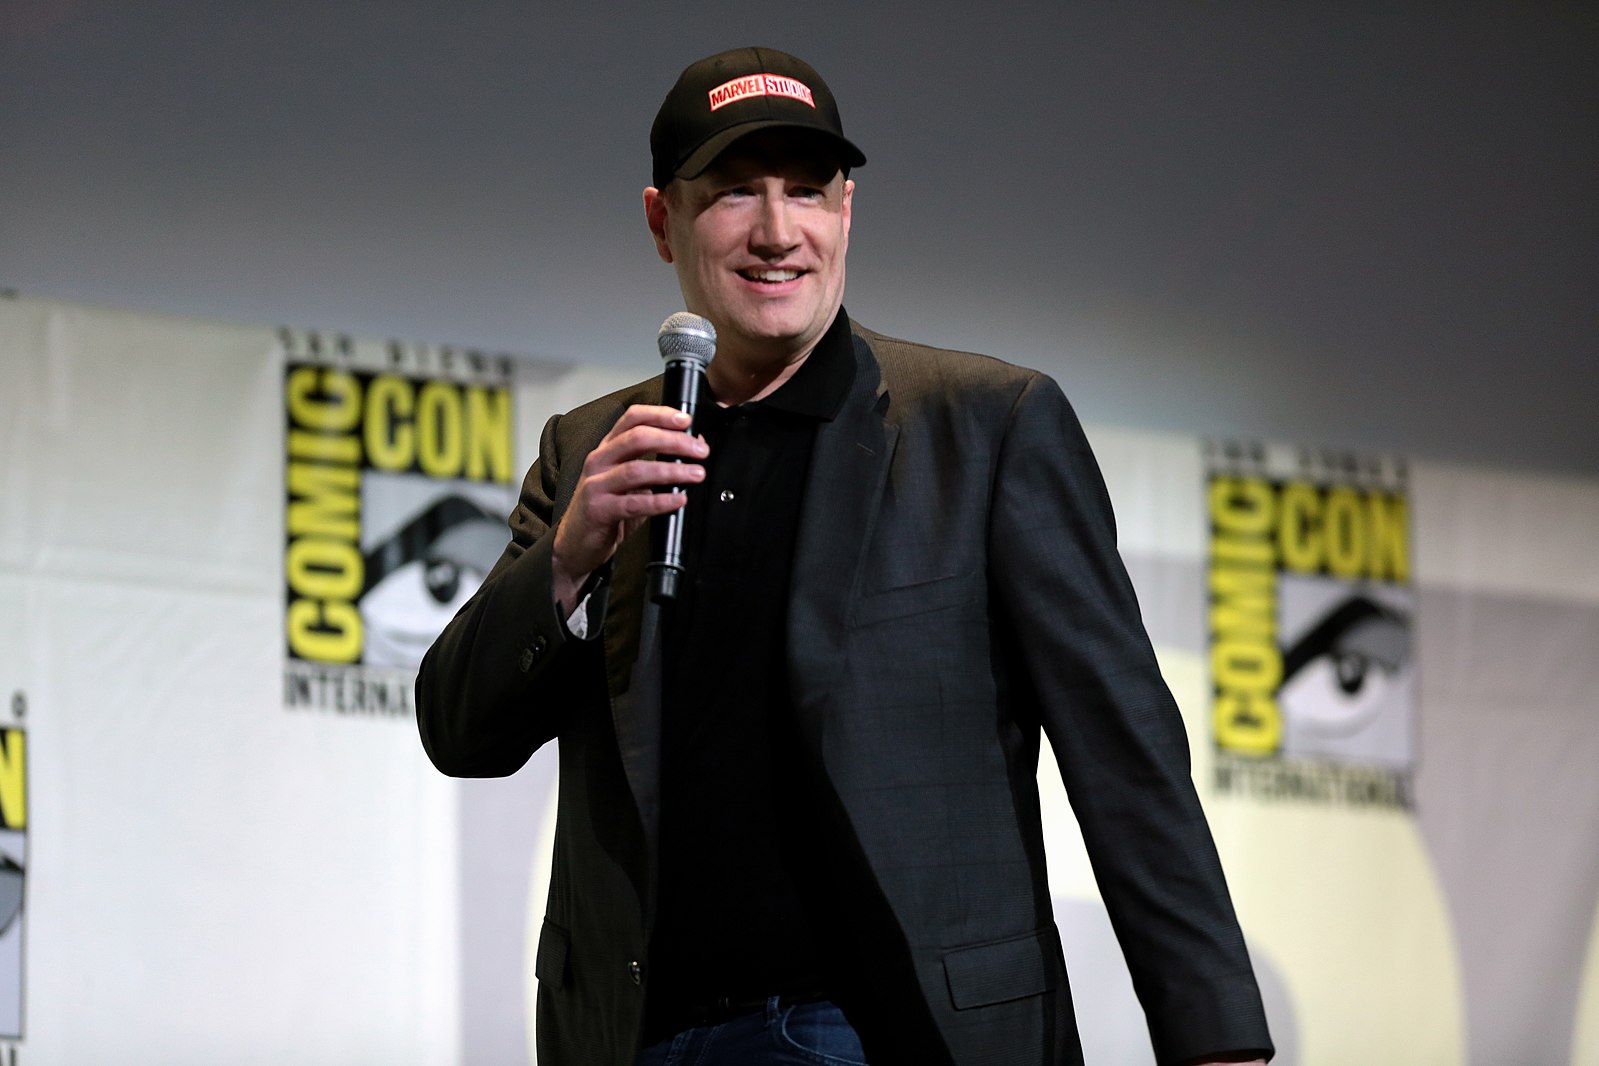 Kevin Feige Almost Drops A Spoiler At Quantumania Premiere